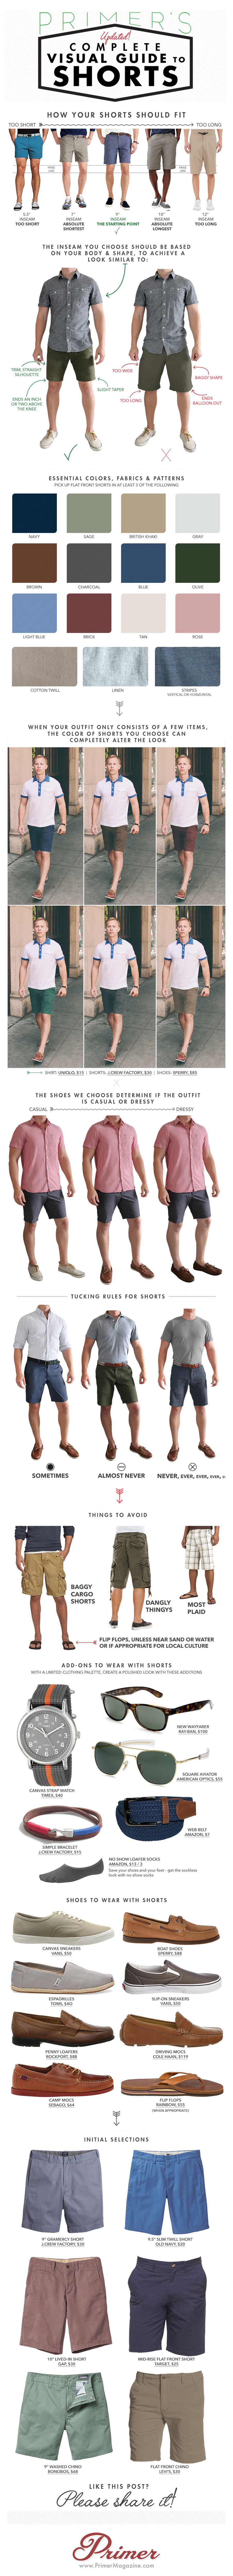 What to Wear with Shorts For Men - Fashion Infographic